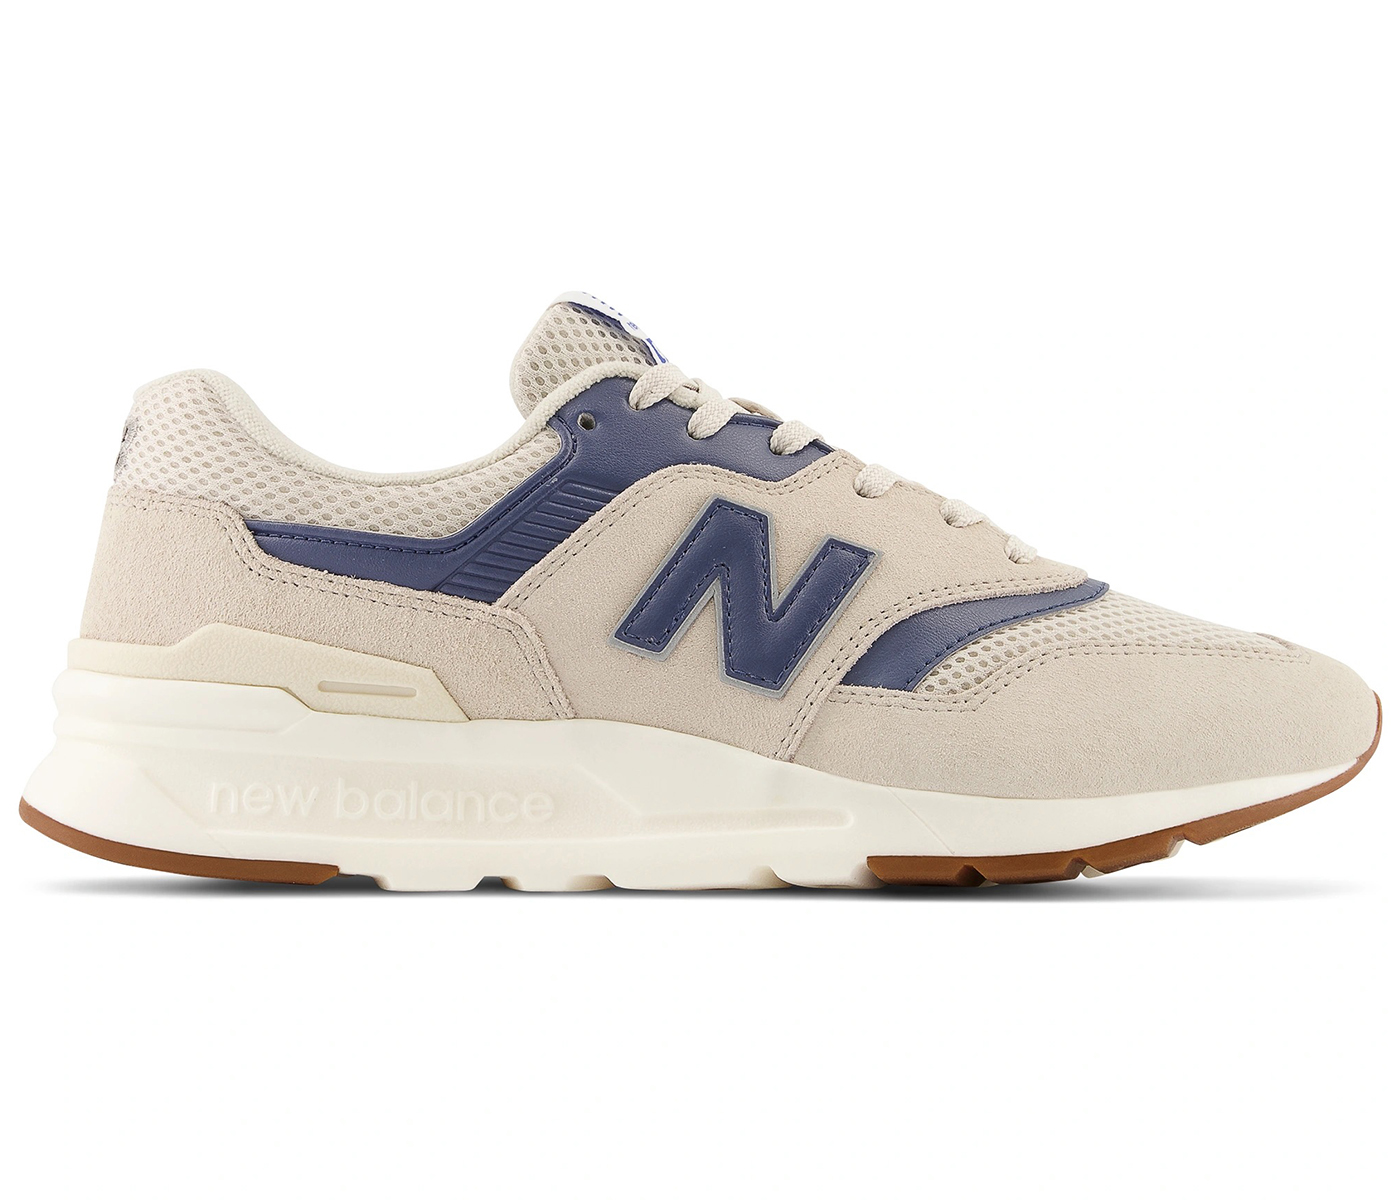 Buy New Balance 997 Shoes & New Sneakers - StockX